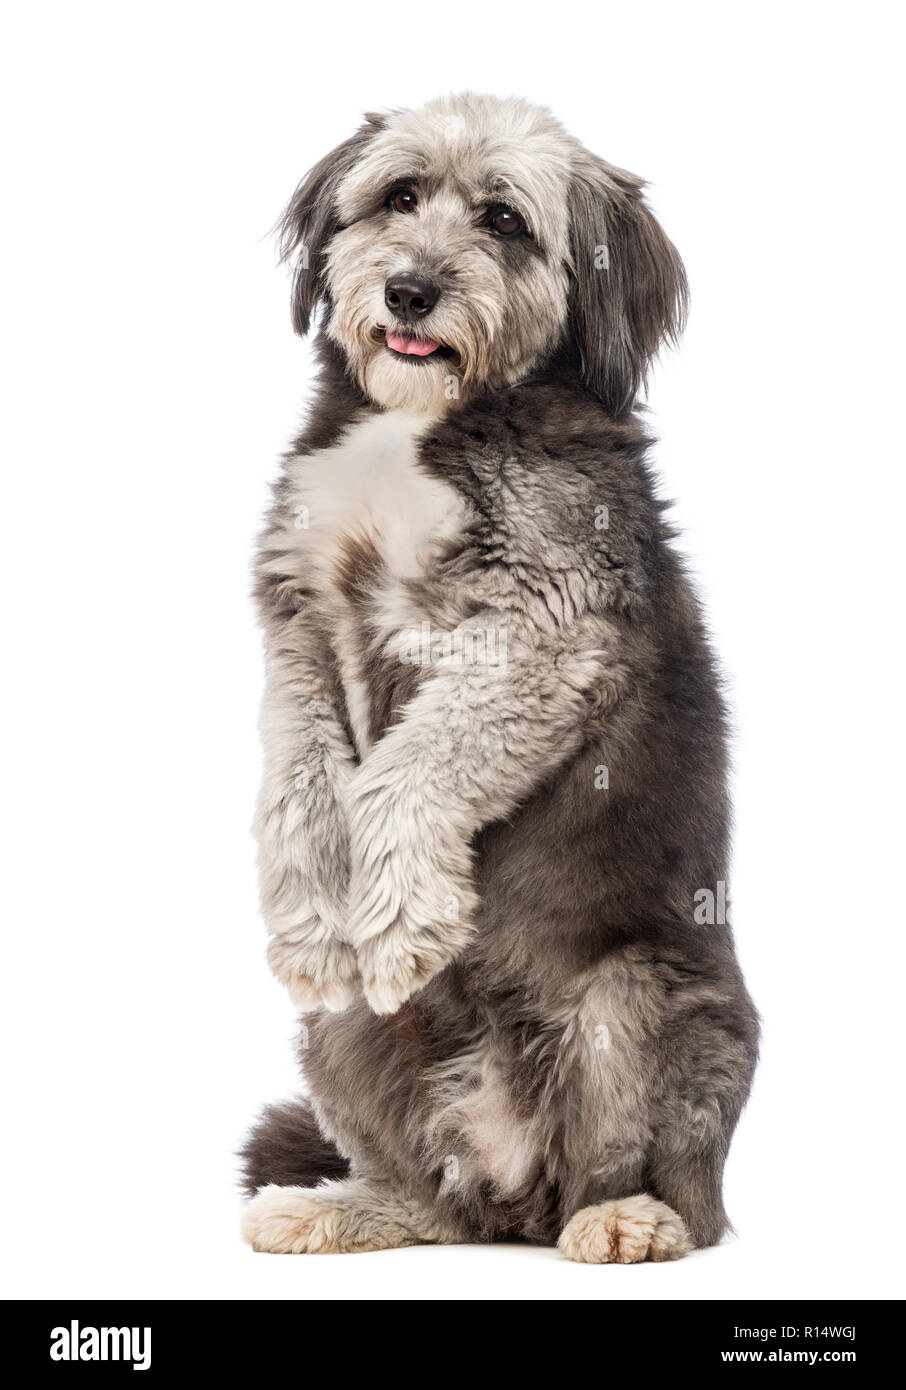 Crossbreed, 4 years old, standing on hind legs and looking at the camera in front of white background Stock Photo